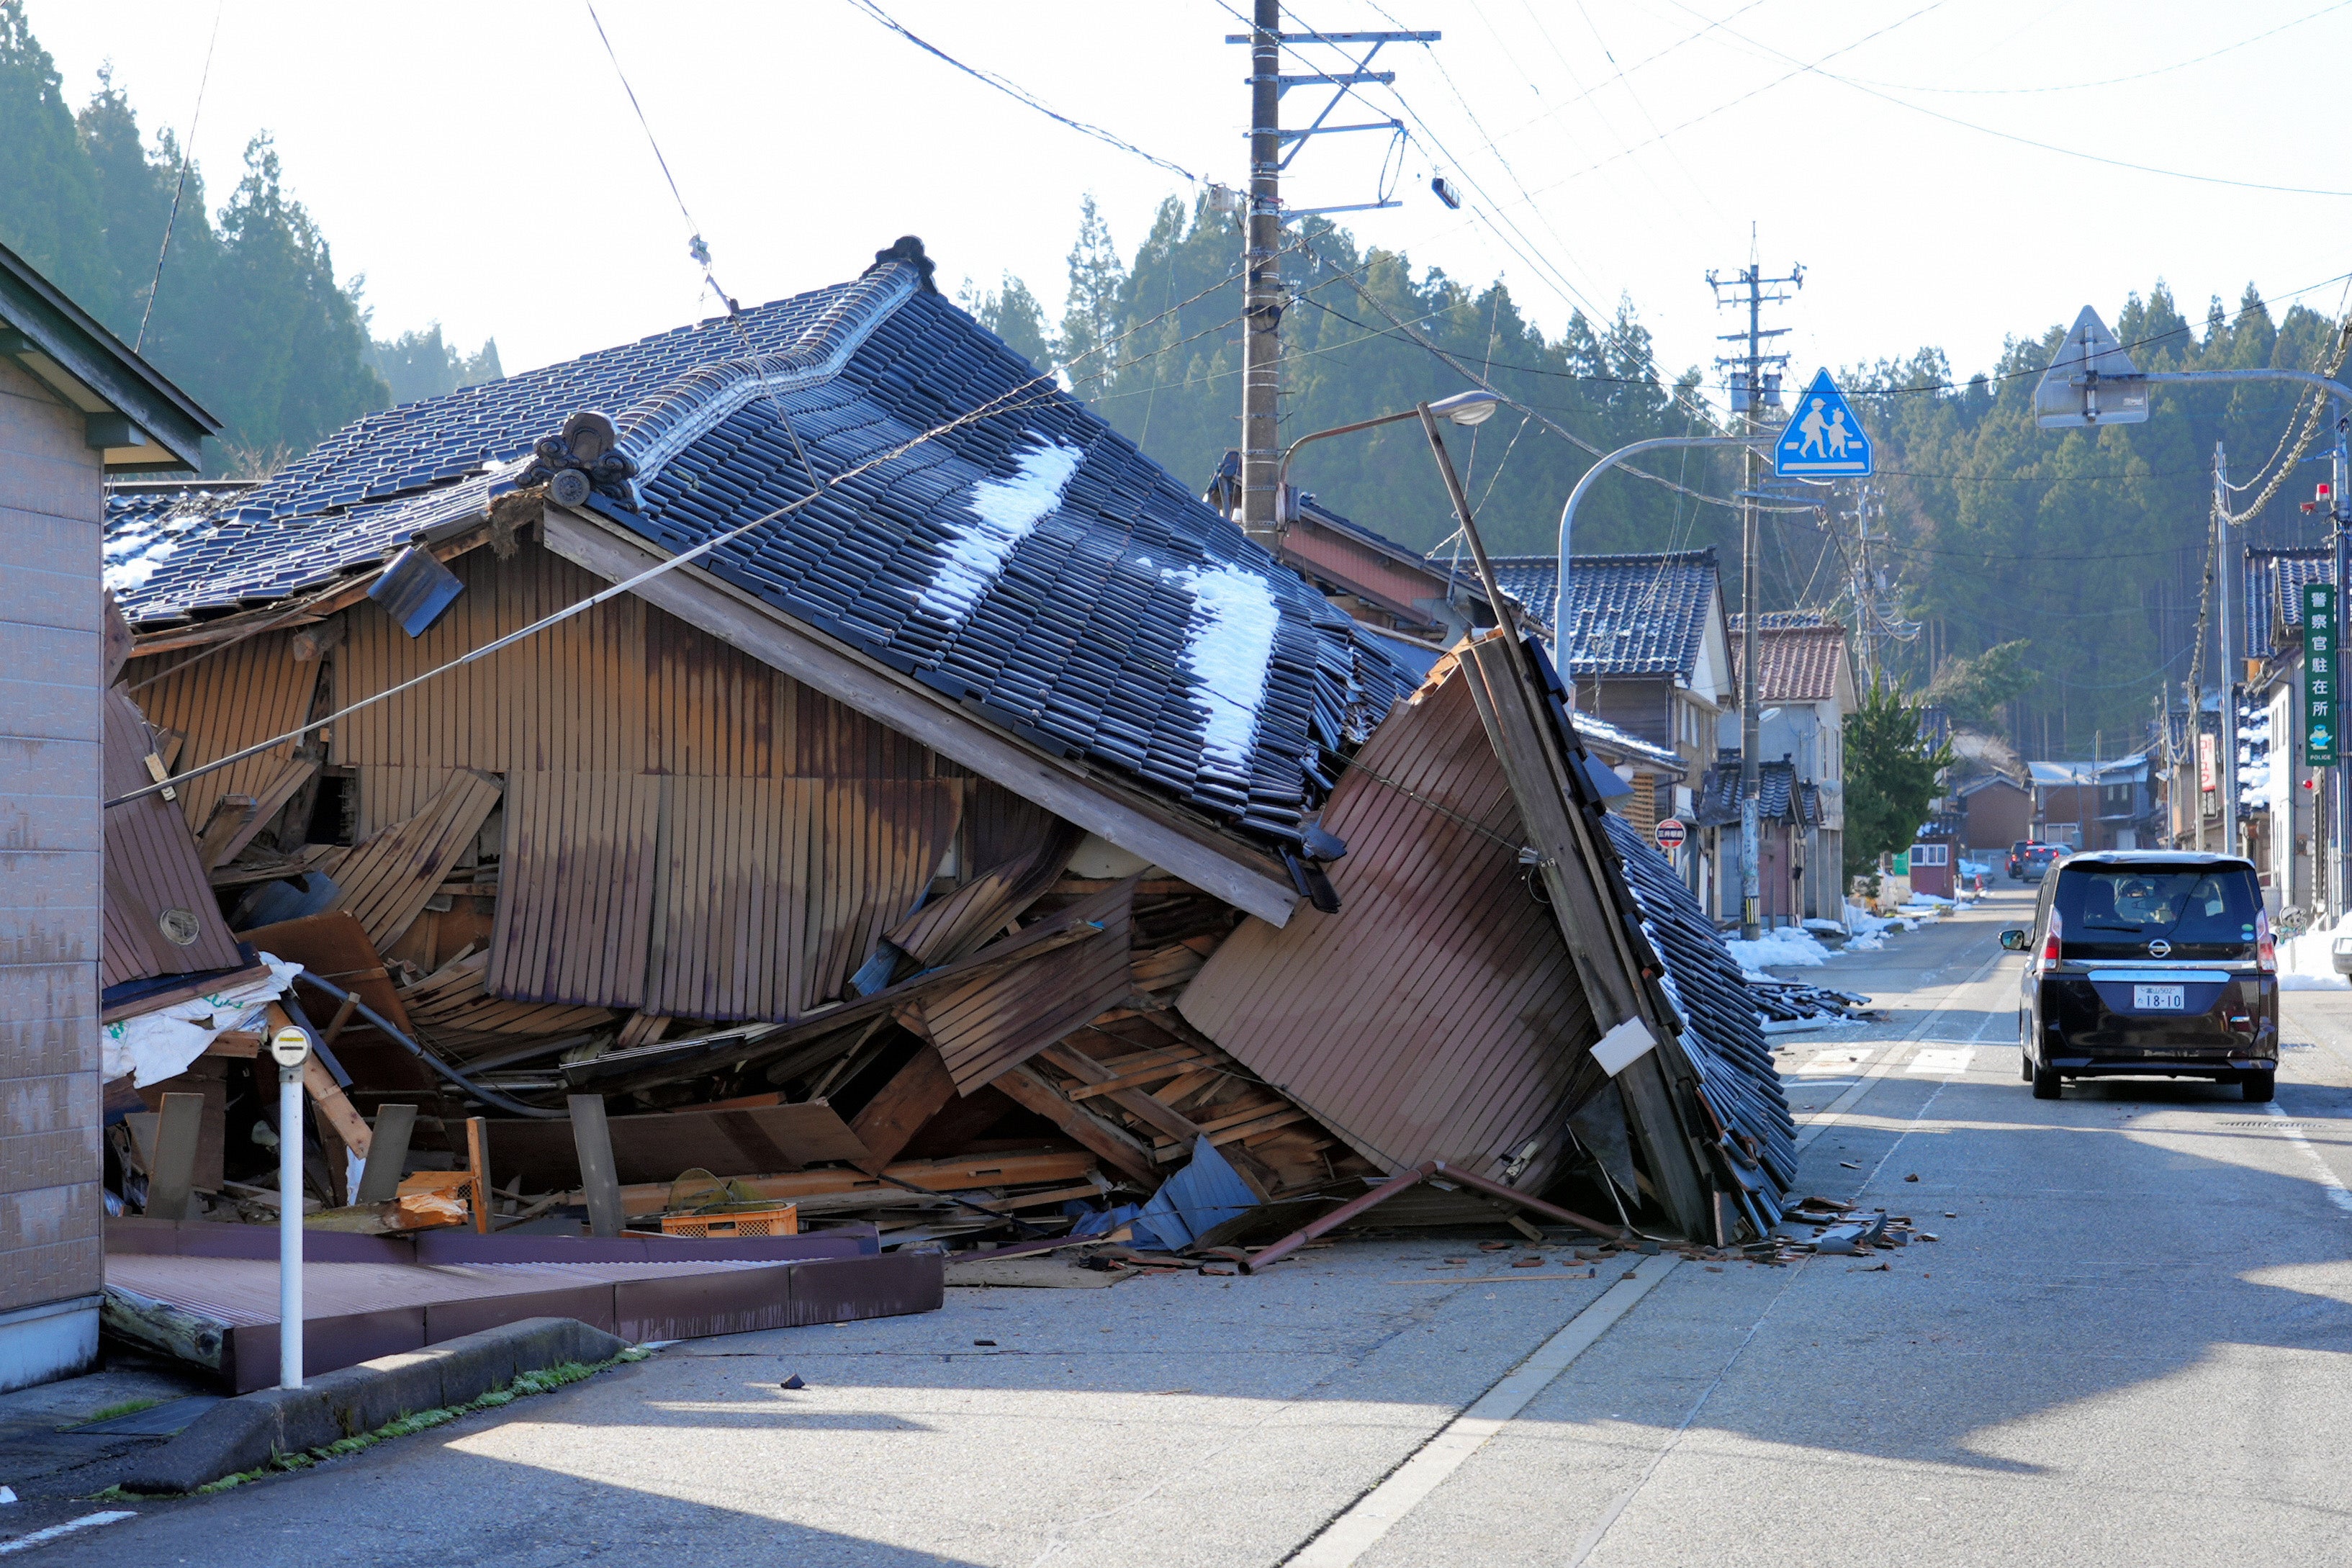 Collapsed houses are seen after multiple strong earthquakes the previous day on 2 January in Wajima, Ishikawa, Japan